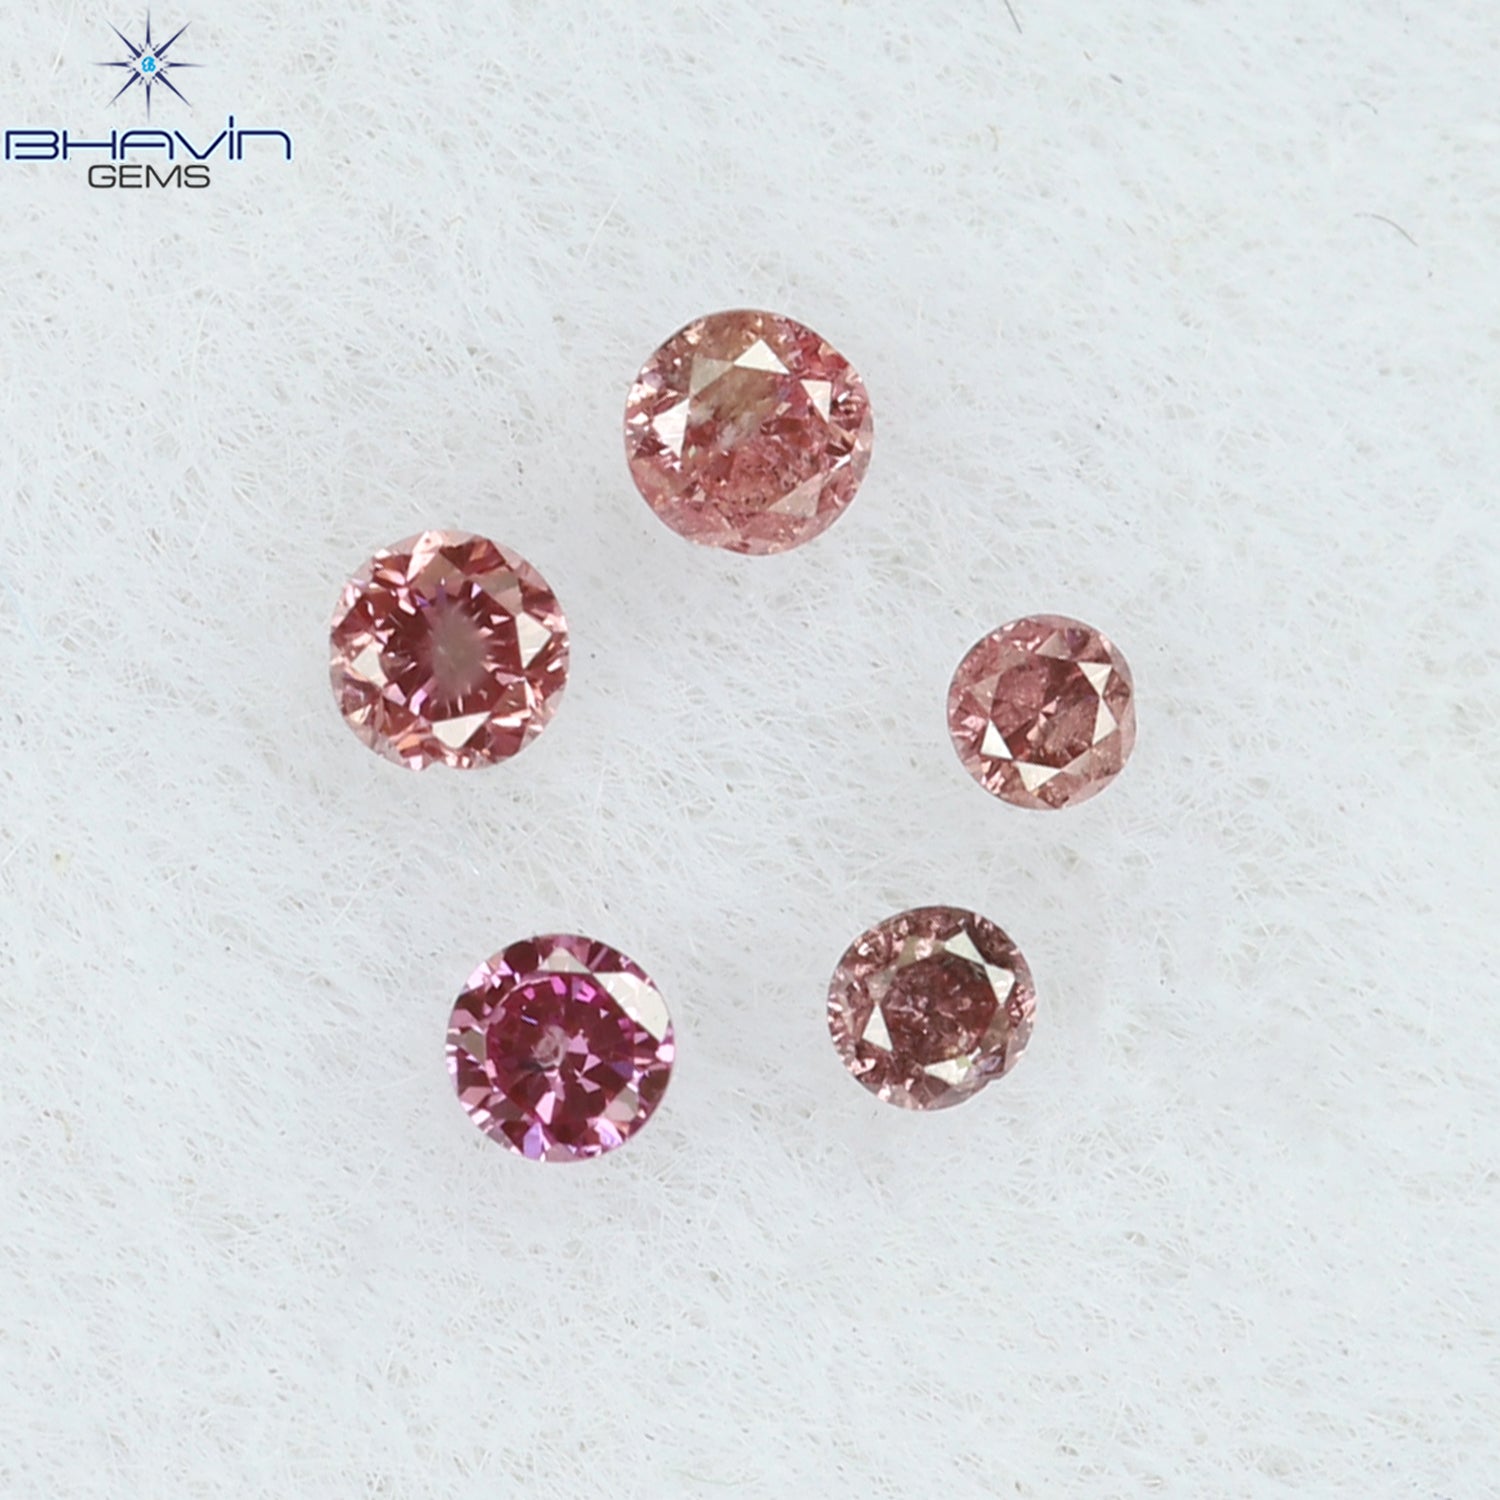 0.05 CT/5 Pcs Round Shape Natural Loose Diamond Pink Color I1 Clarity (0.05 MM)